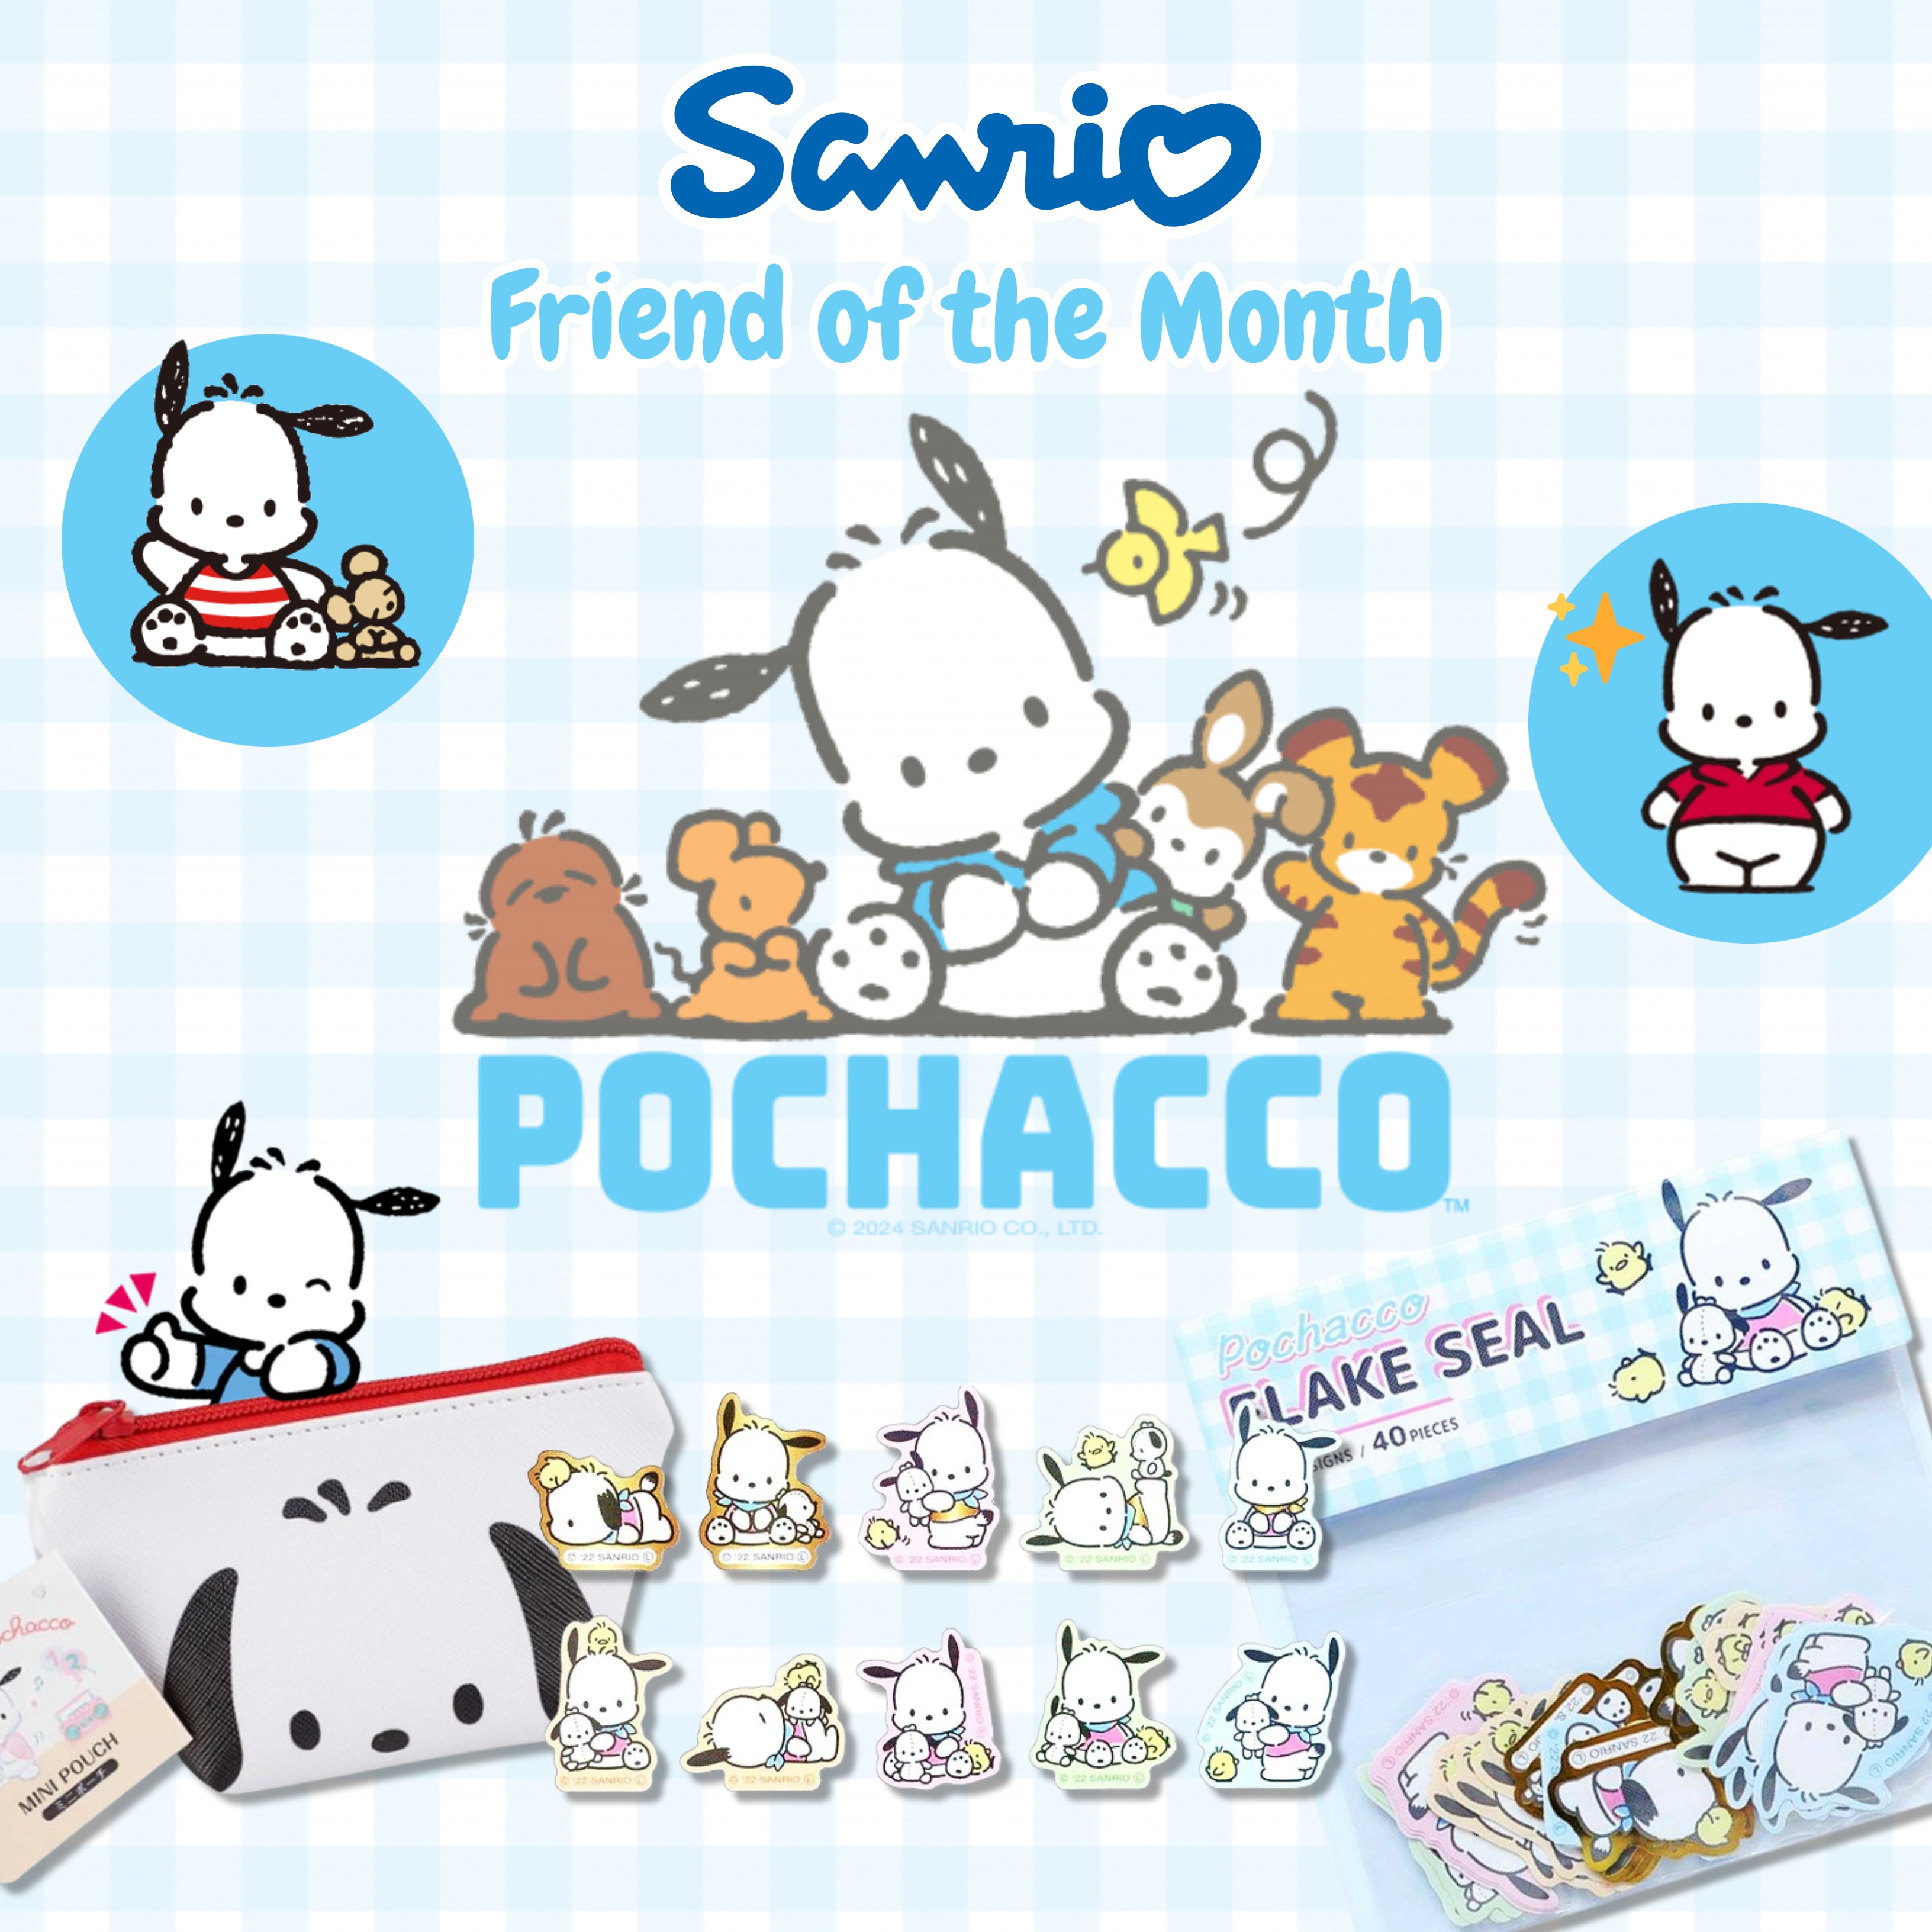 Blog Post about Sanrio Friend of the Month Pochacco! Picture of Pochacco Mini Face Pouch & Pochacco Die Cut Stickers